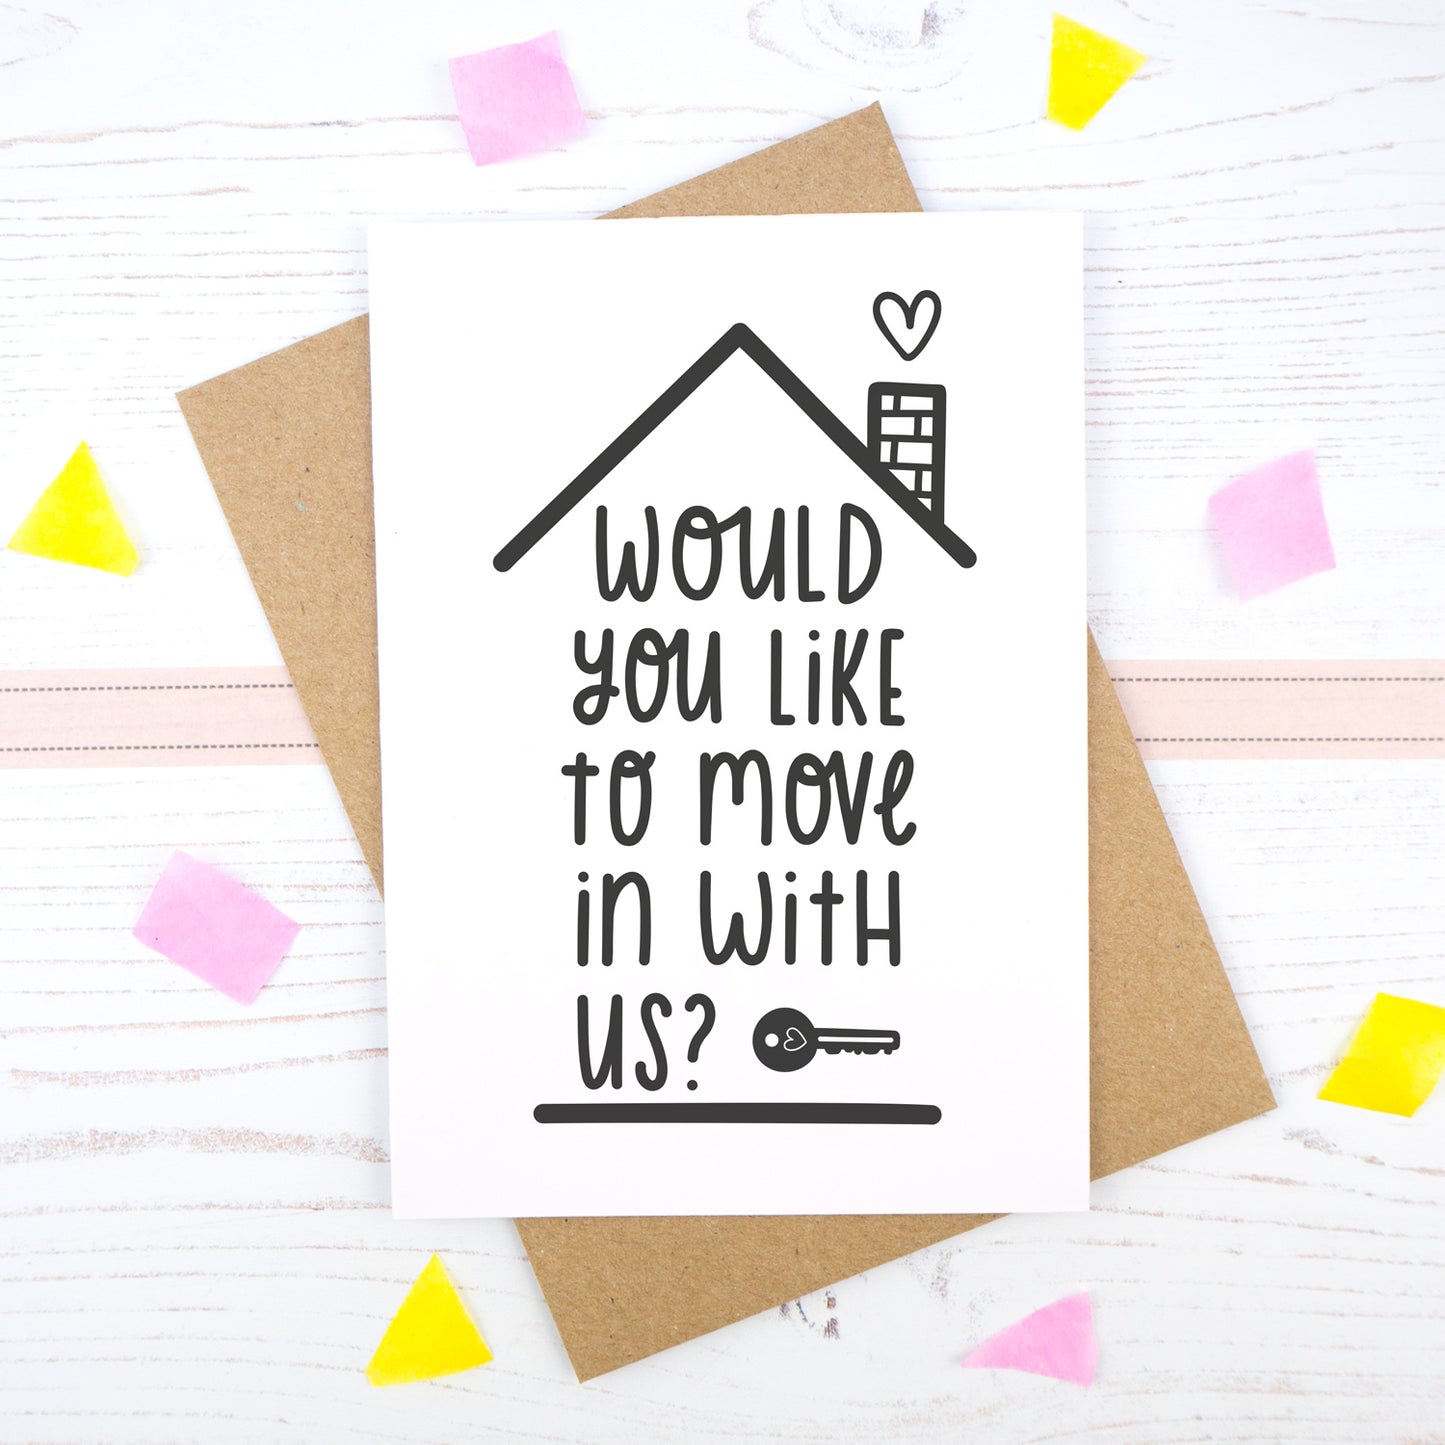 Would you like to move in with us card in black & white, under a roof with a chimney and heart.